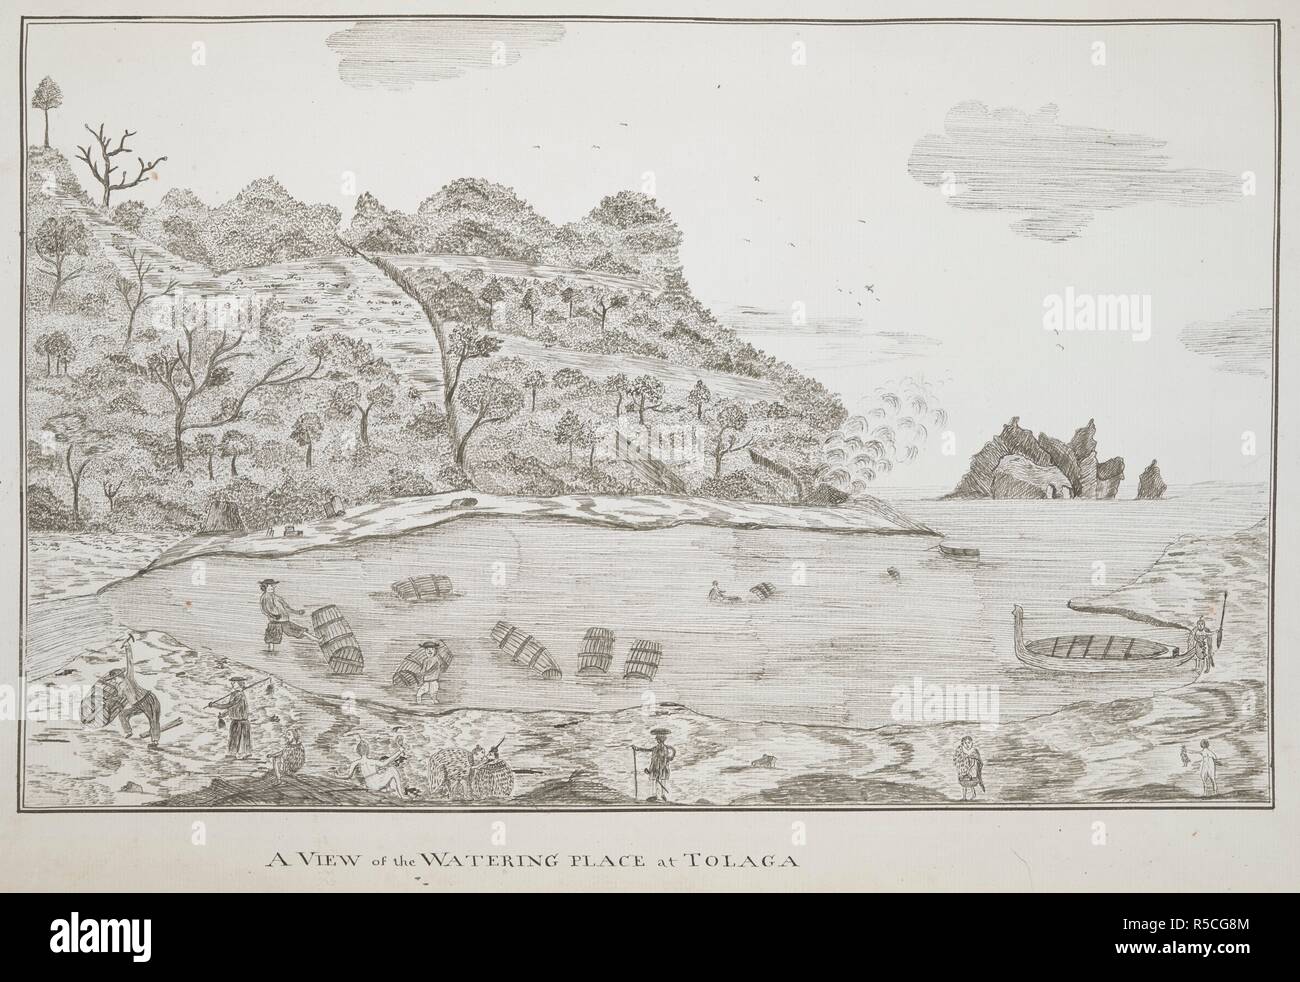 A view of the watering-place at Tolaga; drawn by Lieut. James Cook. Charts, Plans, Views, and Drawings taken on board the Endeavour during Captain Cook's First Voyage, 1768-1771. 1769. Ms. 1 f. 3 in. x 9 1/2 in.; 38 x 24 cm. Source: Add. 7085, No.21. Stock Photo